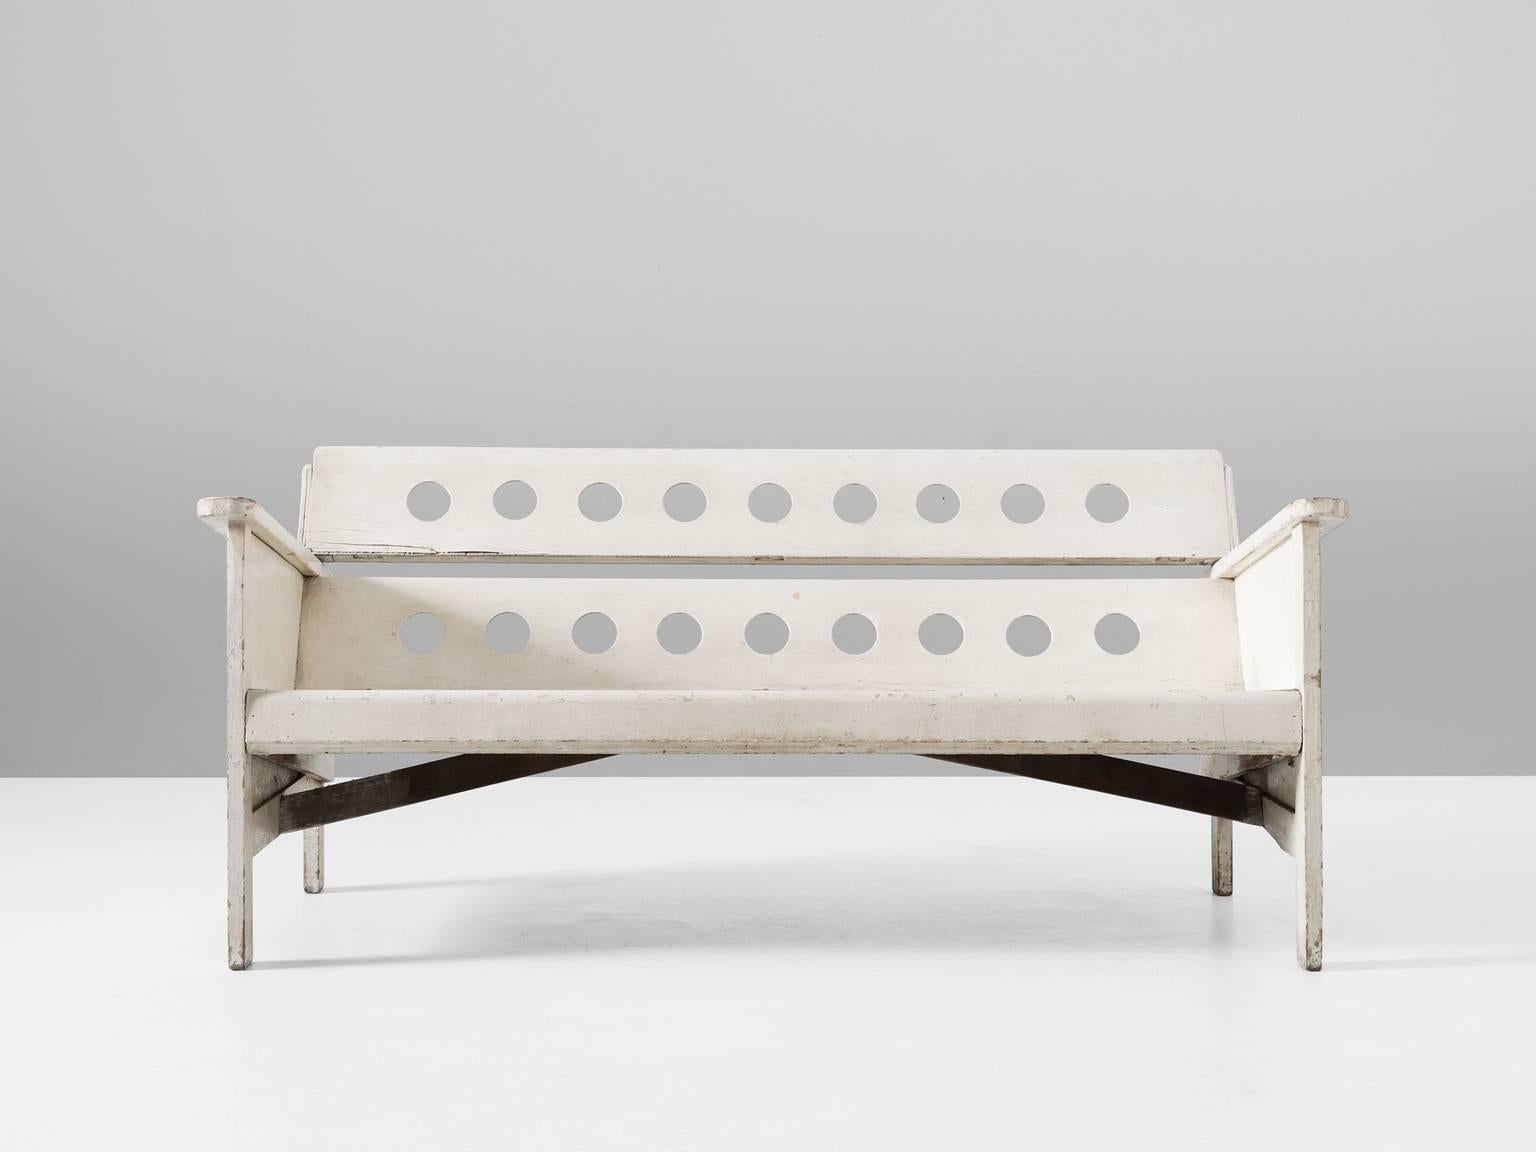 Sofa, in wood, by Jan Cocks, the Netherlands second half of the 20th century.

Interesting bench in white lacquered wood by Dutch artist Jan Cocks. This garden bench shows a basic design. Due the sloping lines and circles in the back the design